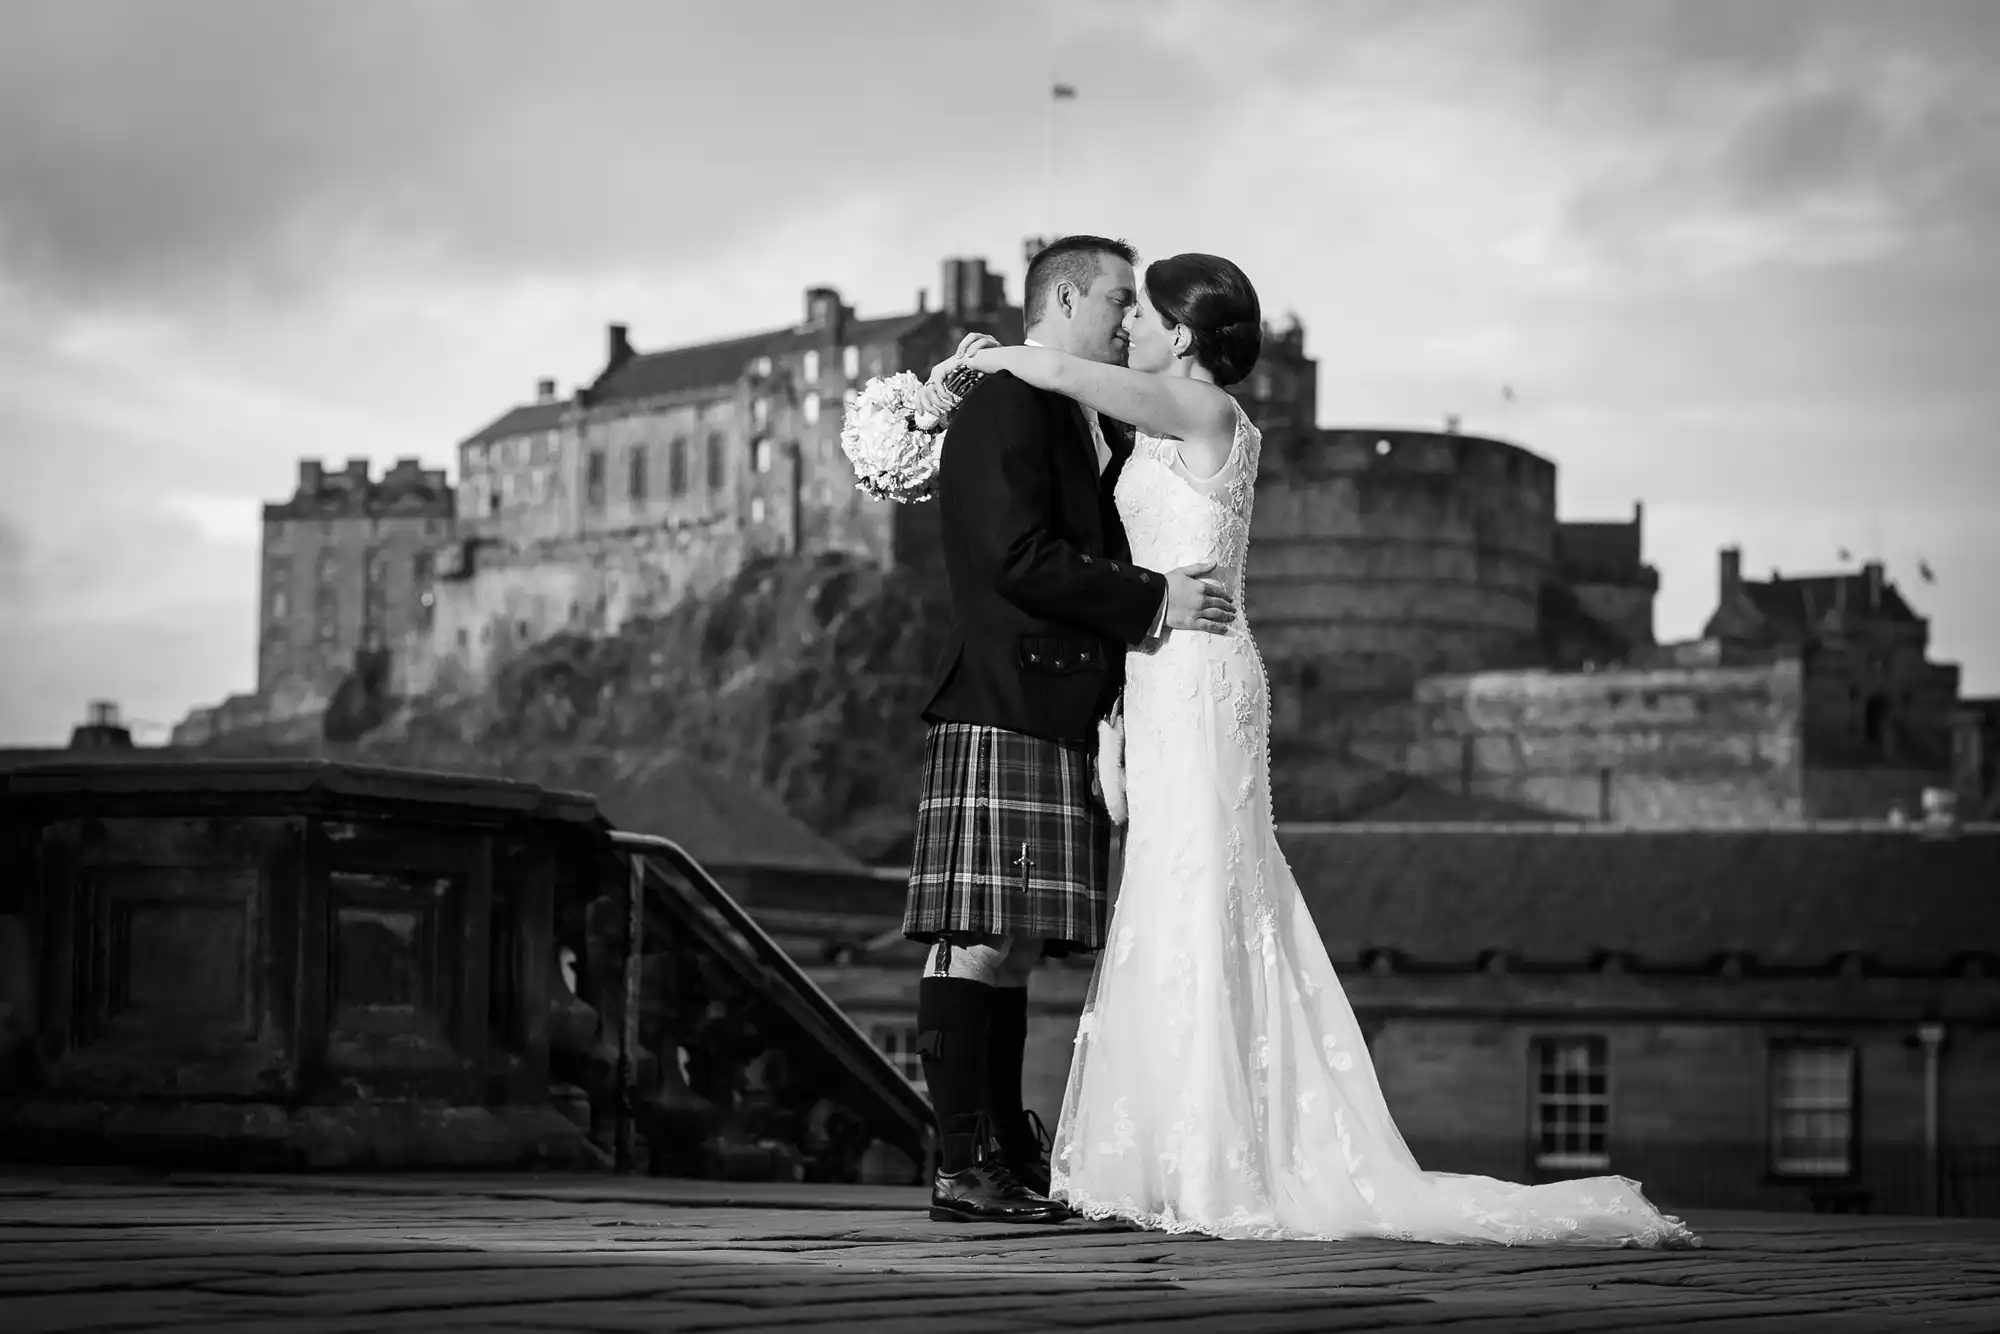 A bride and groom kissing, with the groom dressed in a kilt. edinburgh castle is visible in the background.